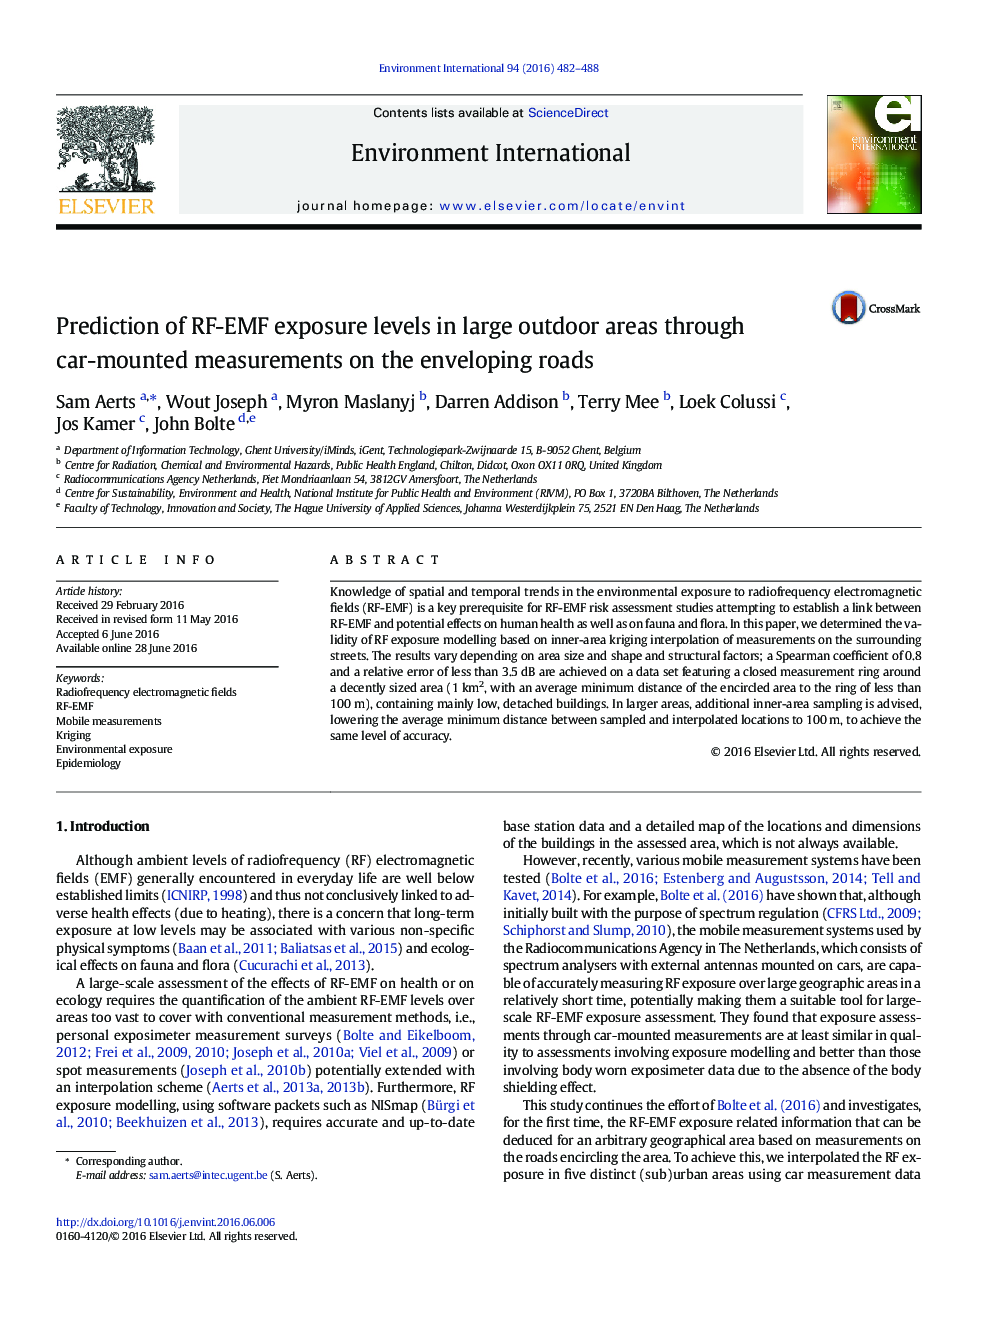 Prediction of RF-EMF exposure levels in large outdoor areas through car-mounted measurements on the enveloping roads